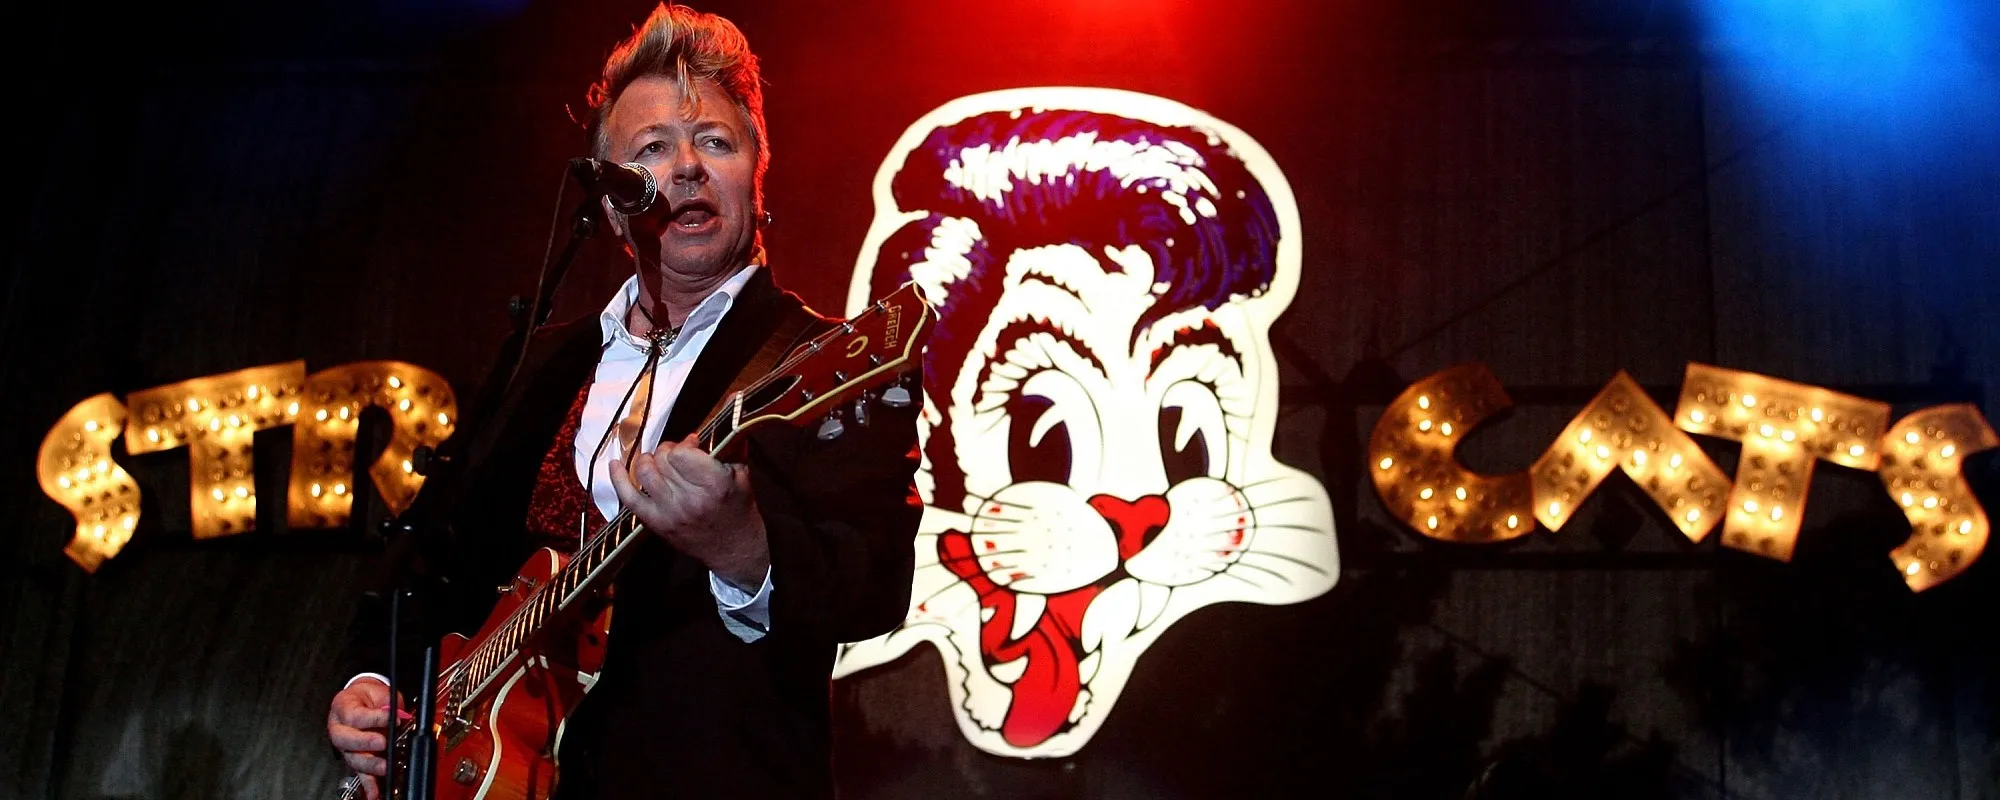 Check Out 5 Fascinating Facts About the Stray Cats’ Brian Setzer in Honor of His 65th Birthday